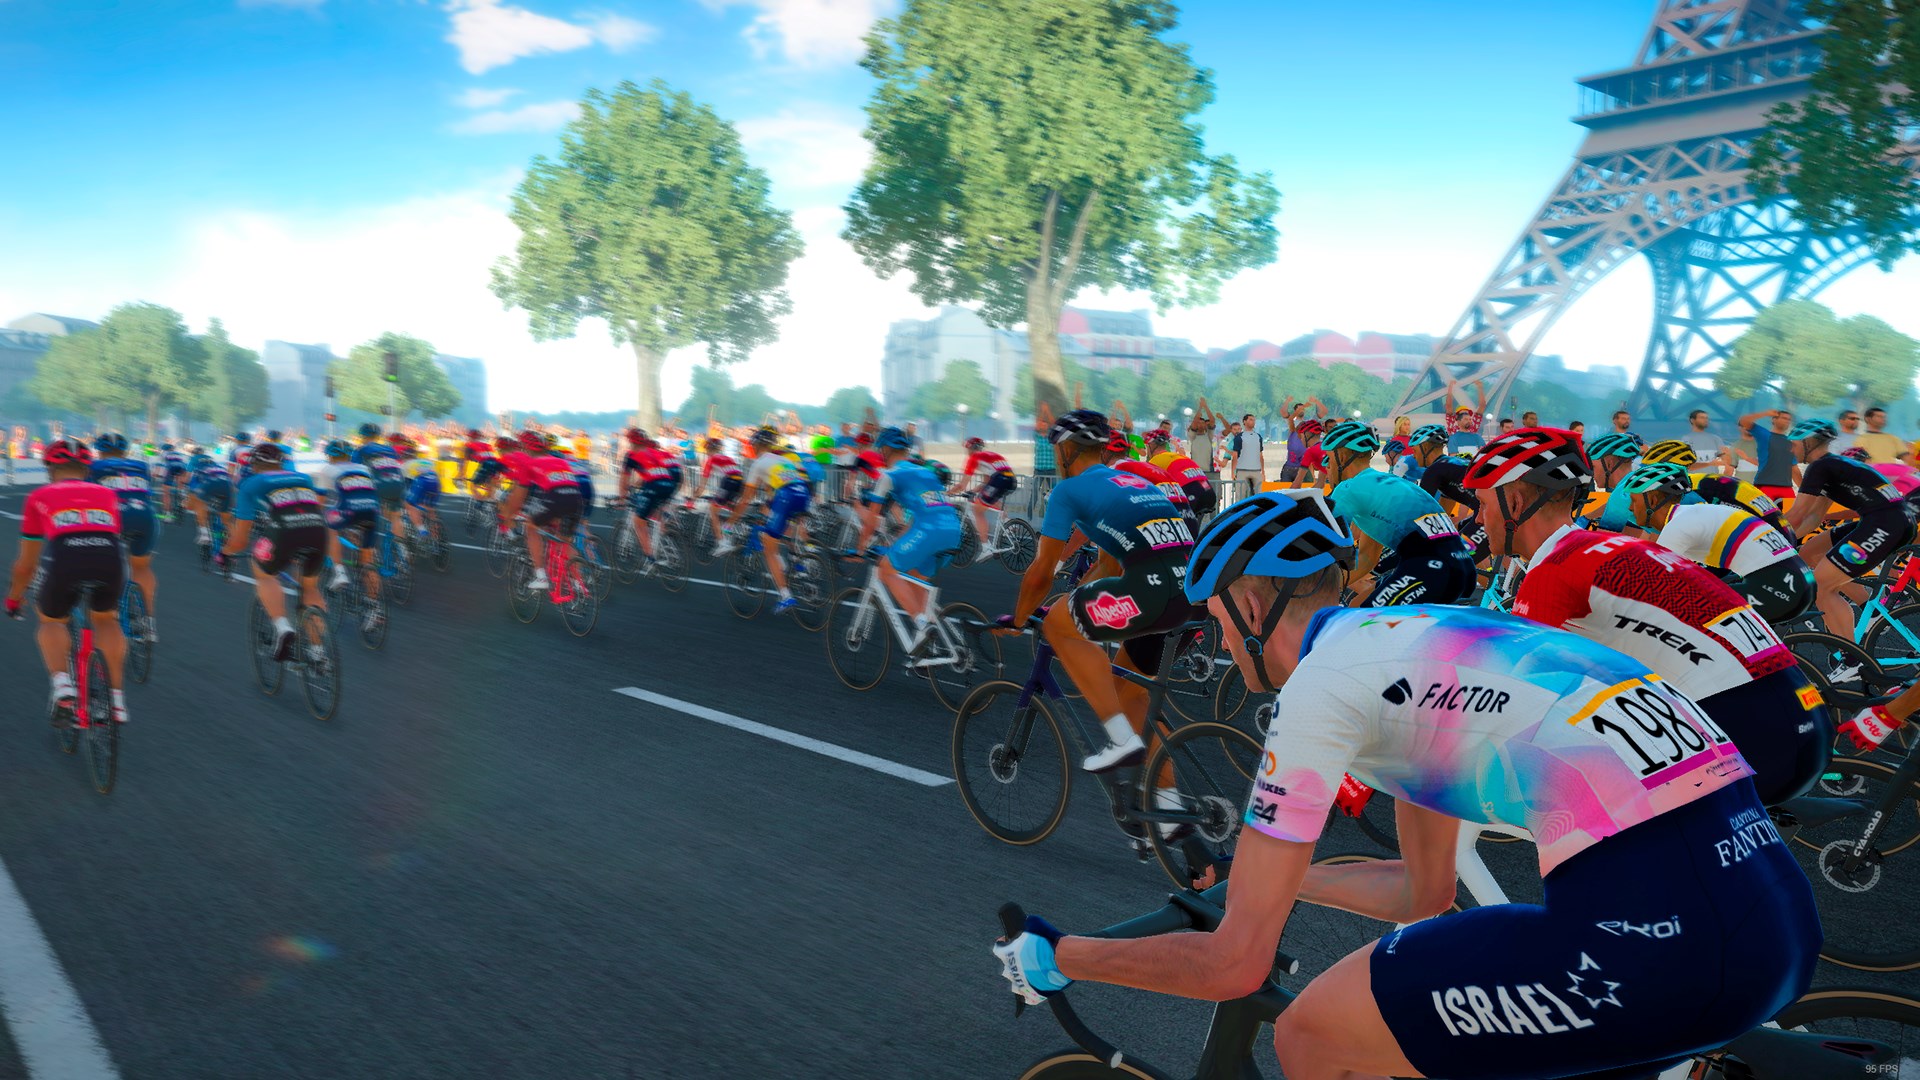 Tour de France and Pro Cycling Manager 2023, the latest edition of